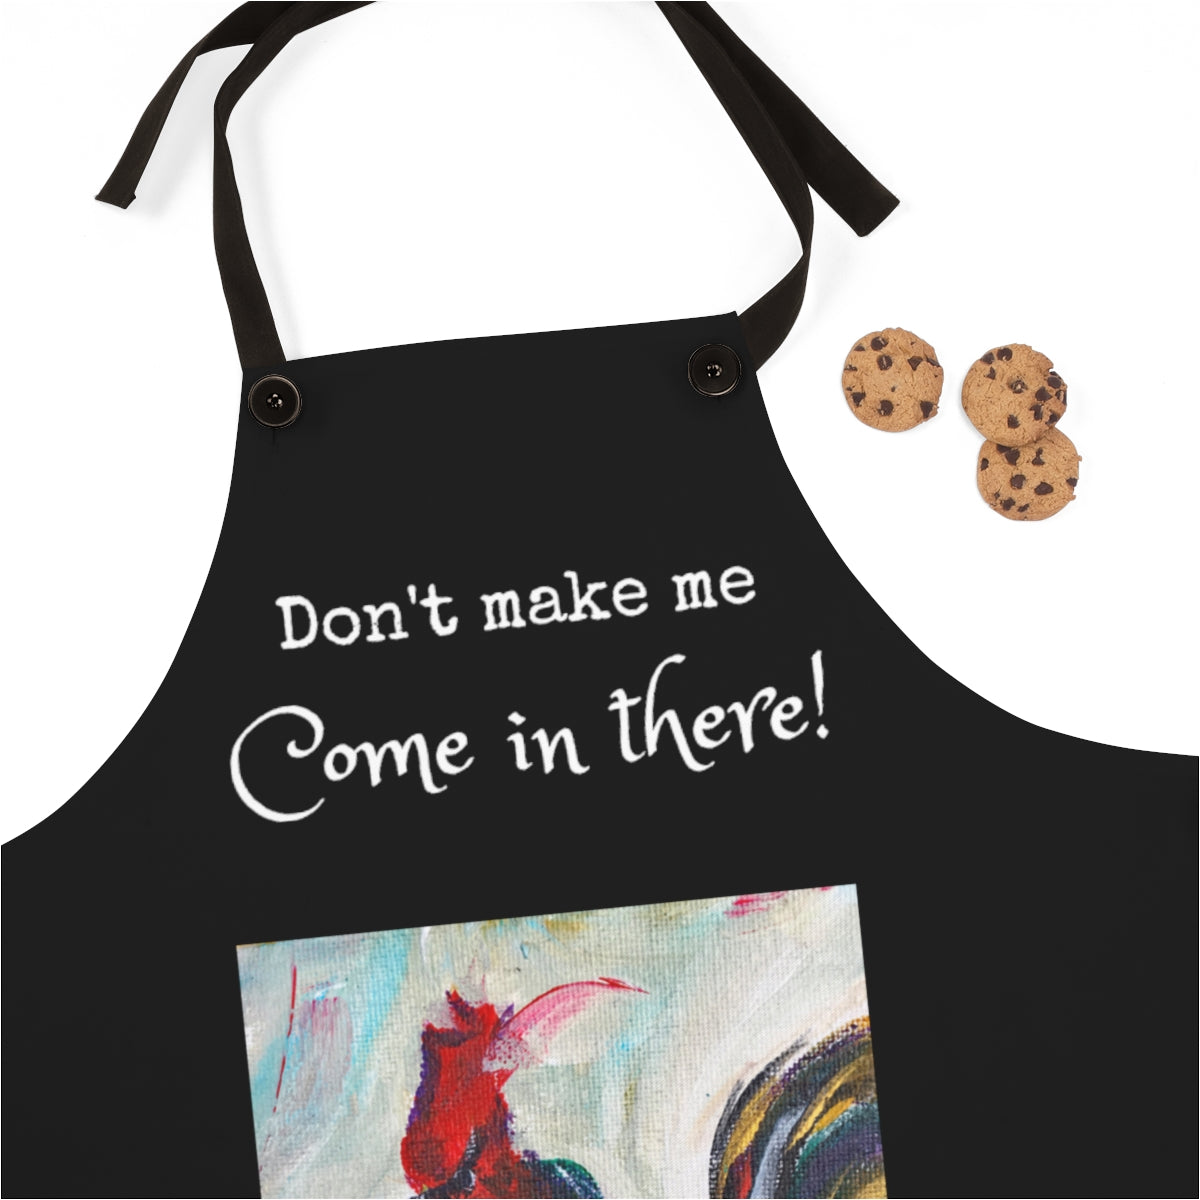 Don't make me come in there!  Chef  Black Kitchen Apron  with Original  funny Rooster